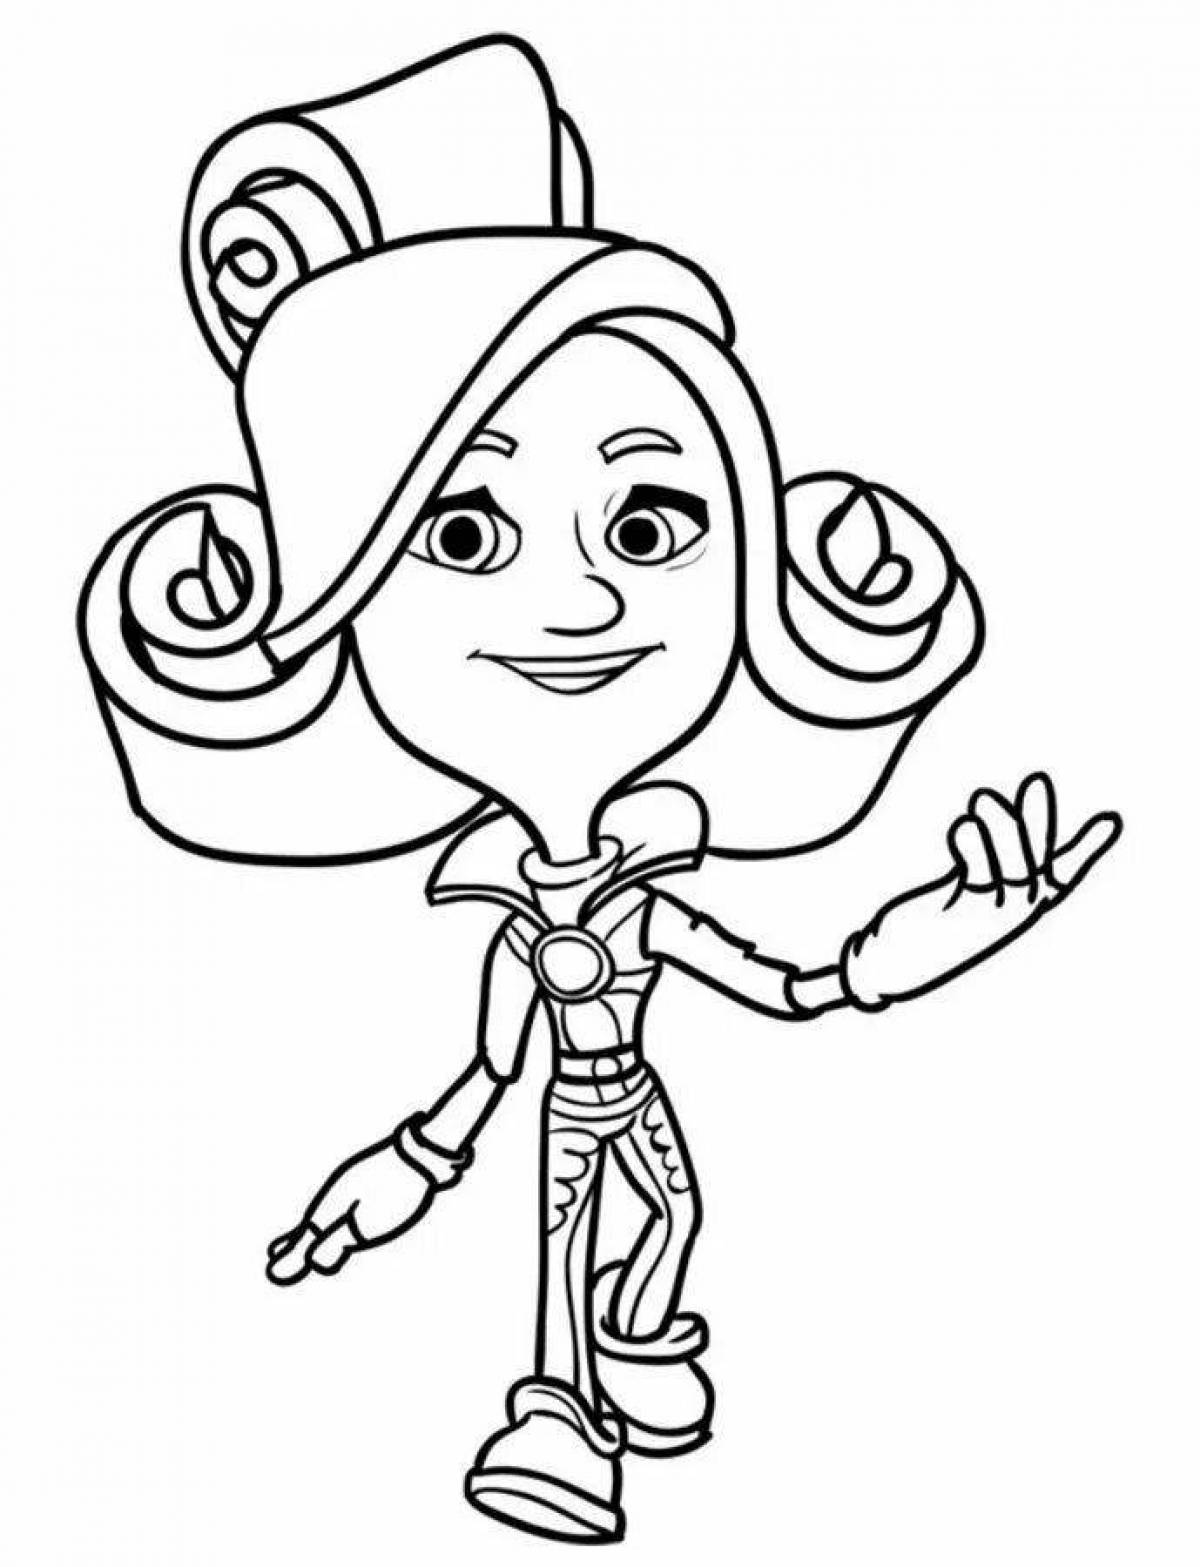 Sparkling coil coloring page